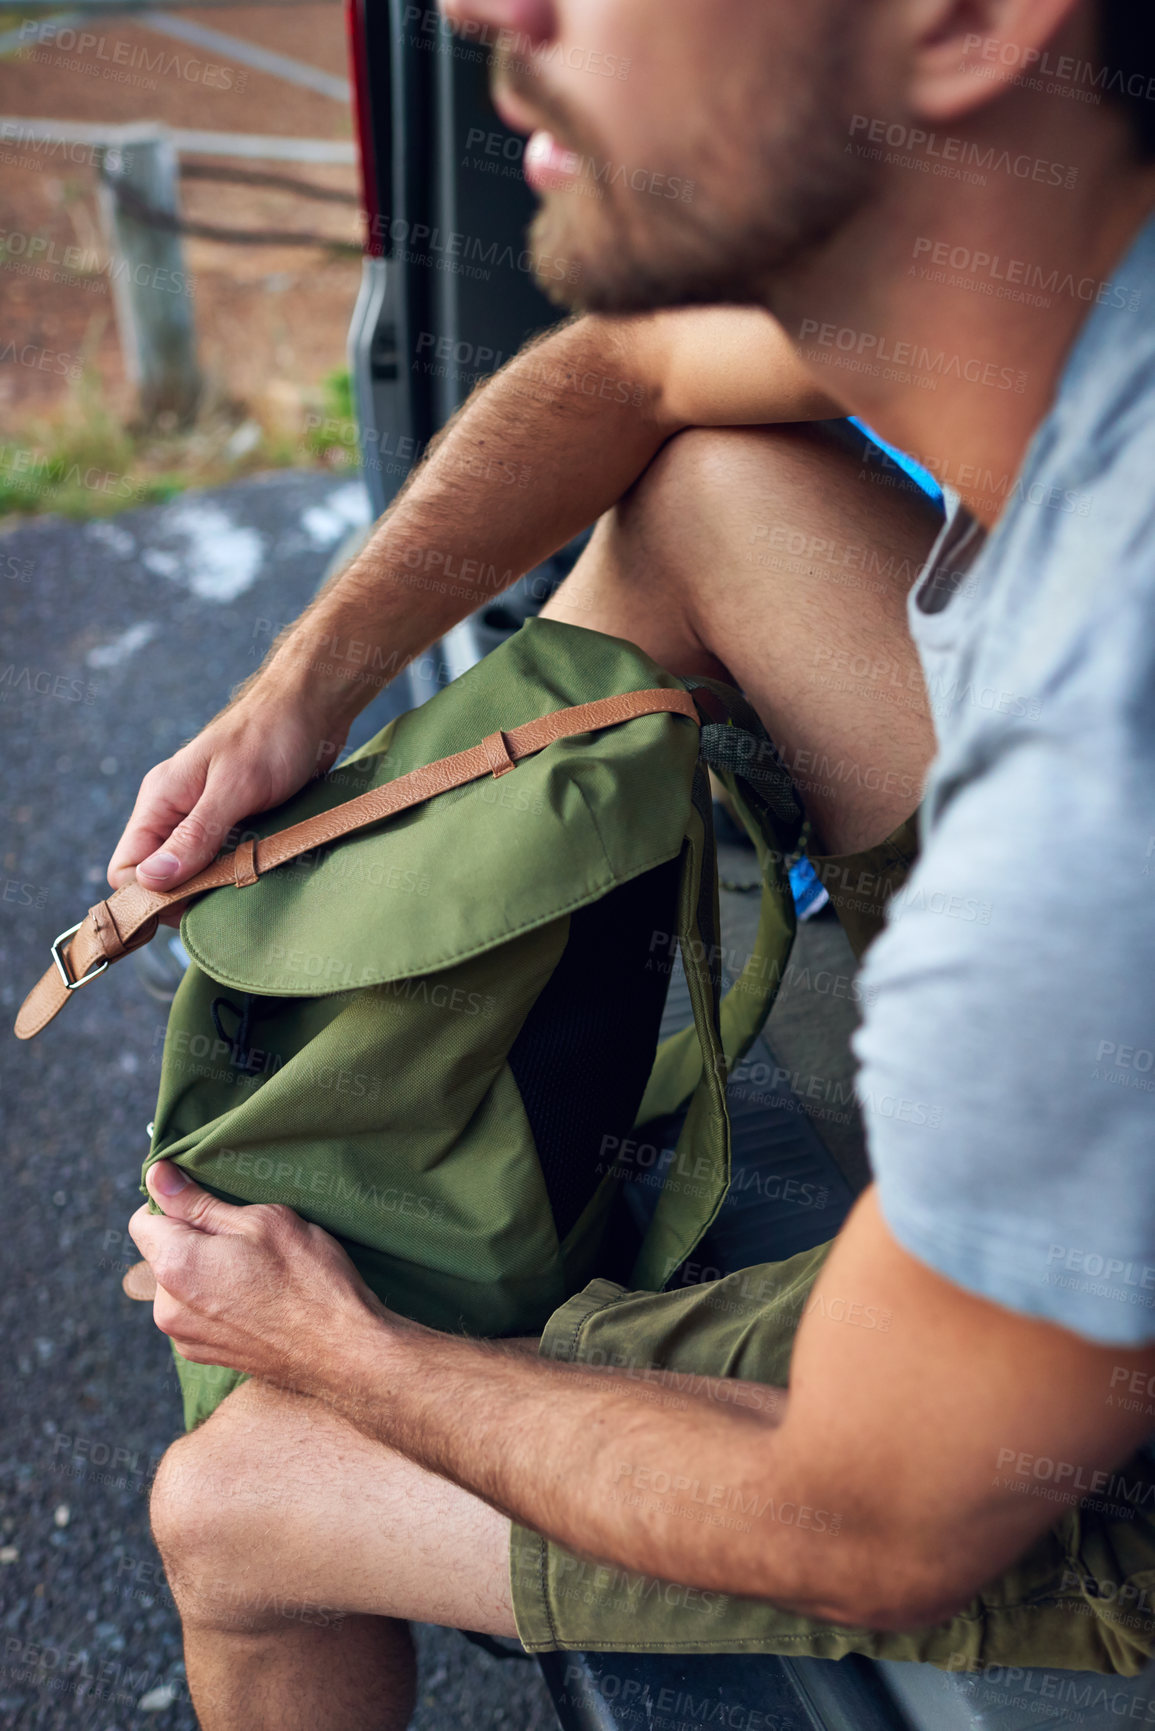 Buy stock photo Cropped shot of a man sitting in the back of his vehicle with a backpack